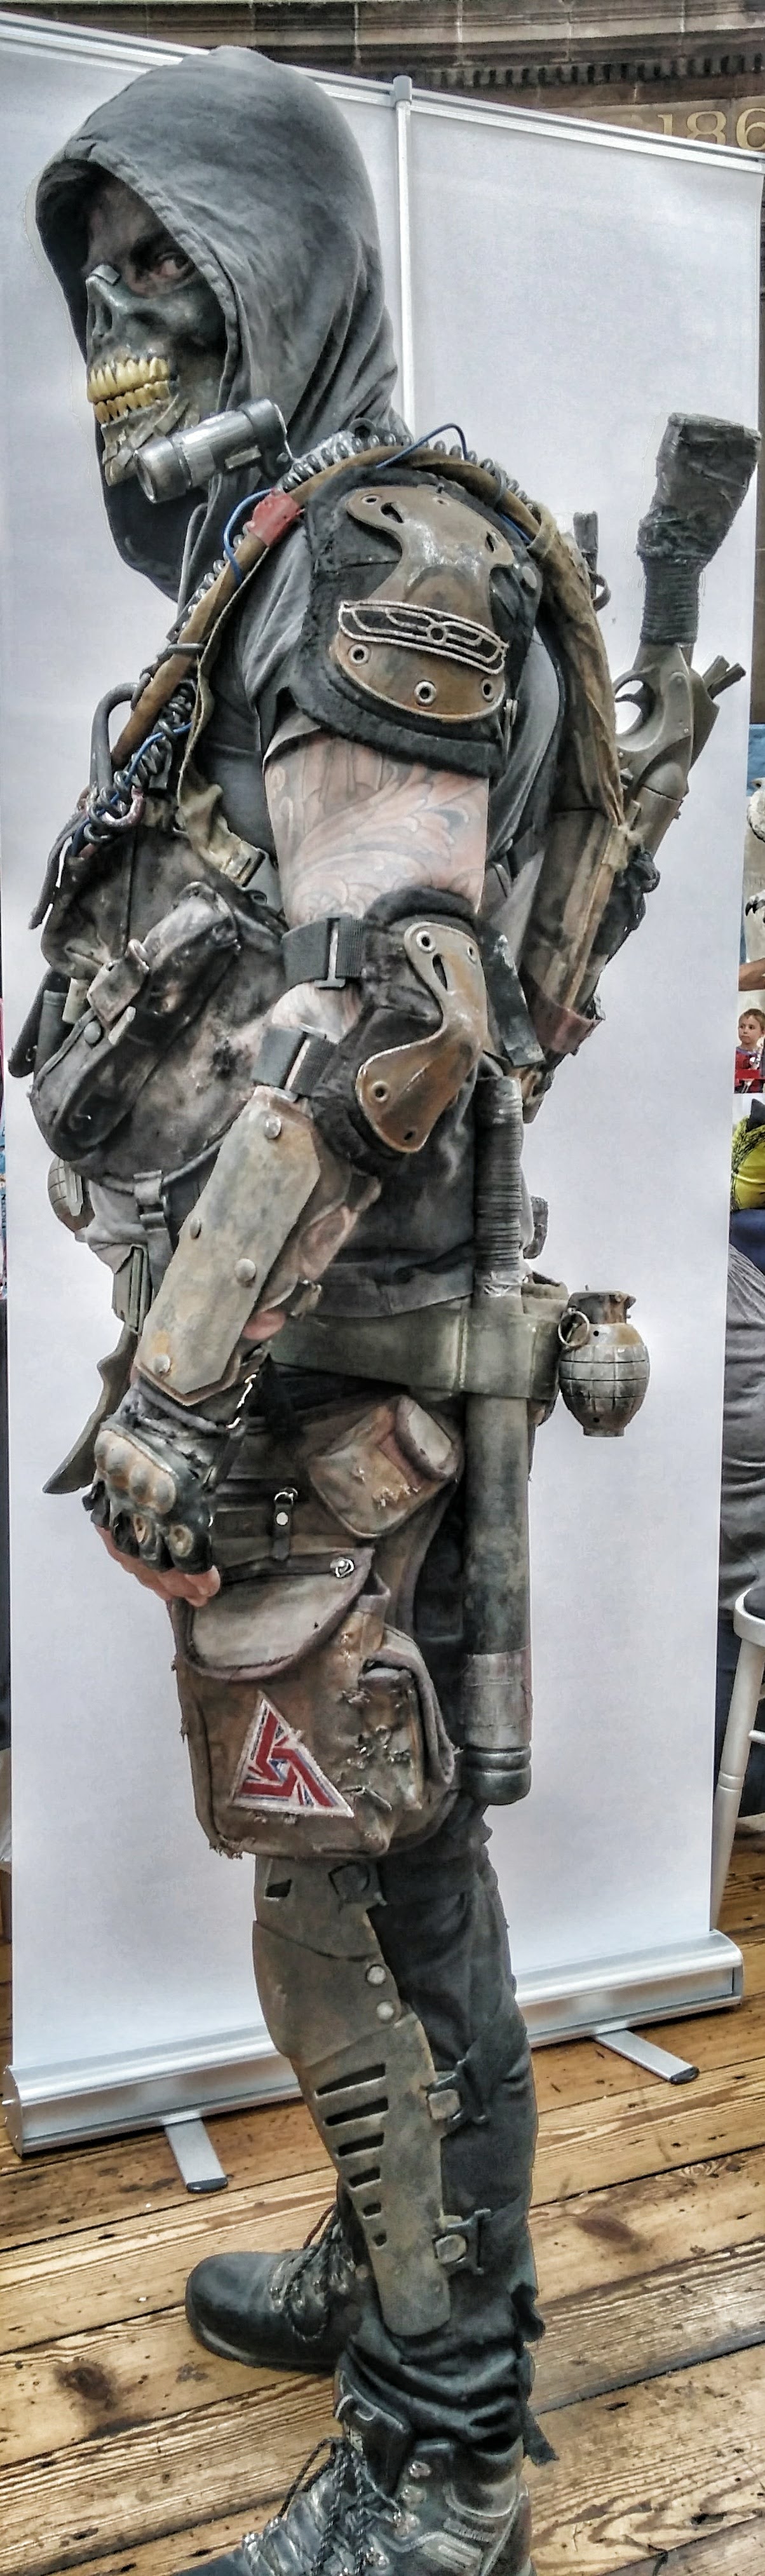 Post Apocalyptic Gear  RPF Costume and Prop Maker Community